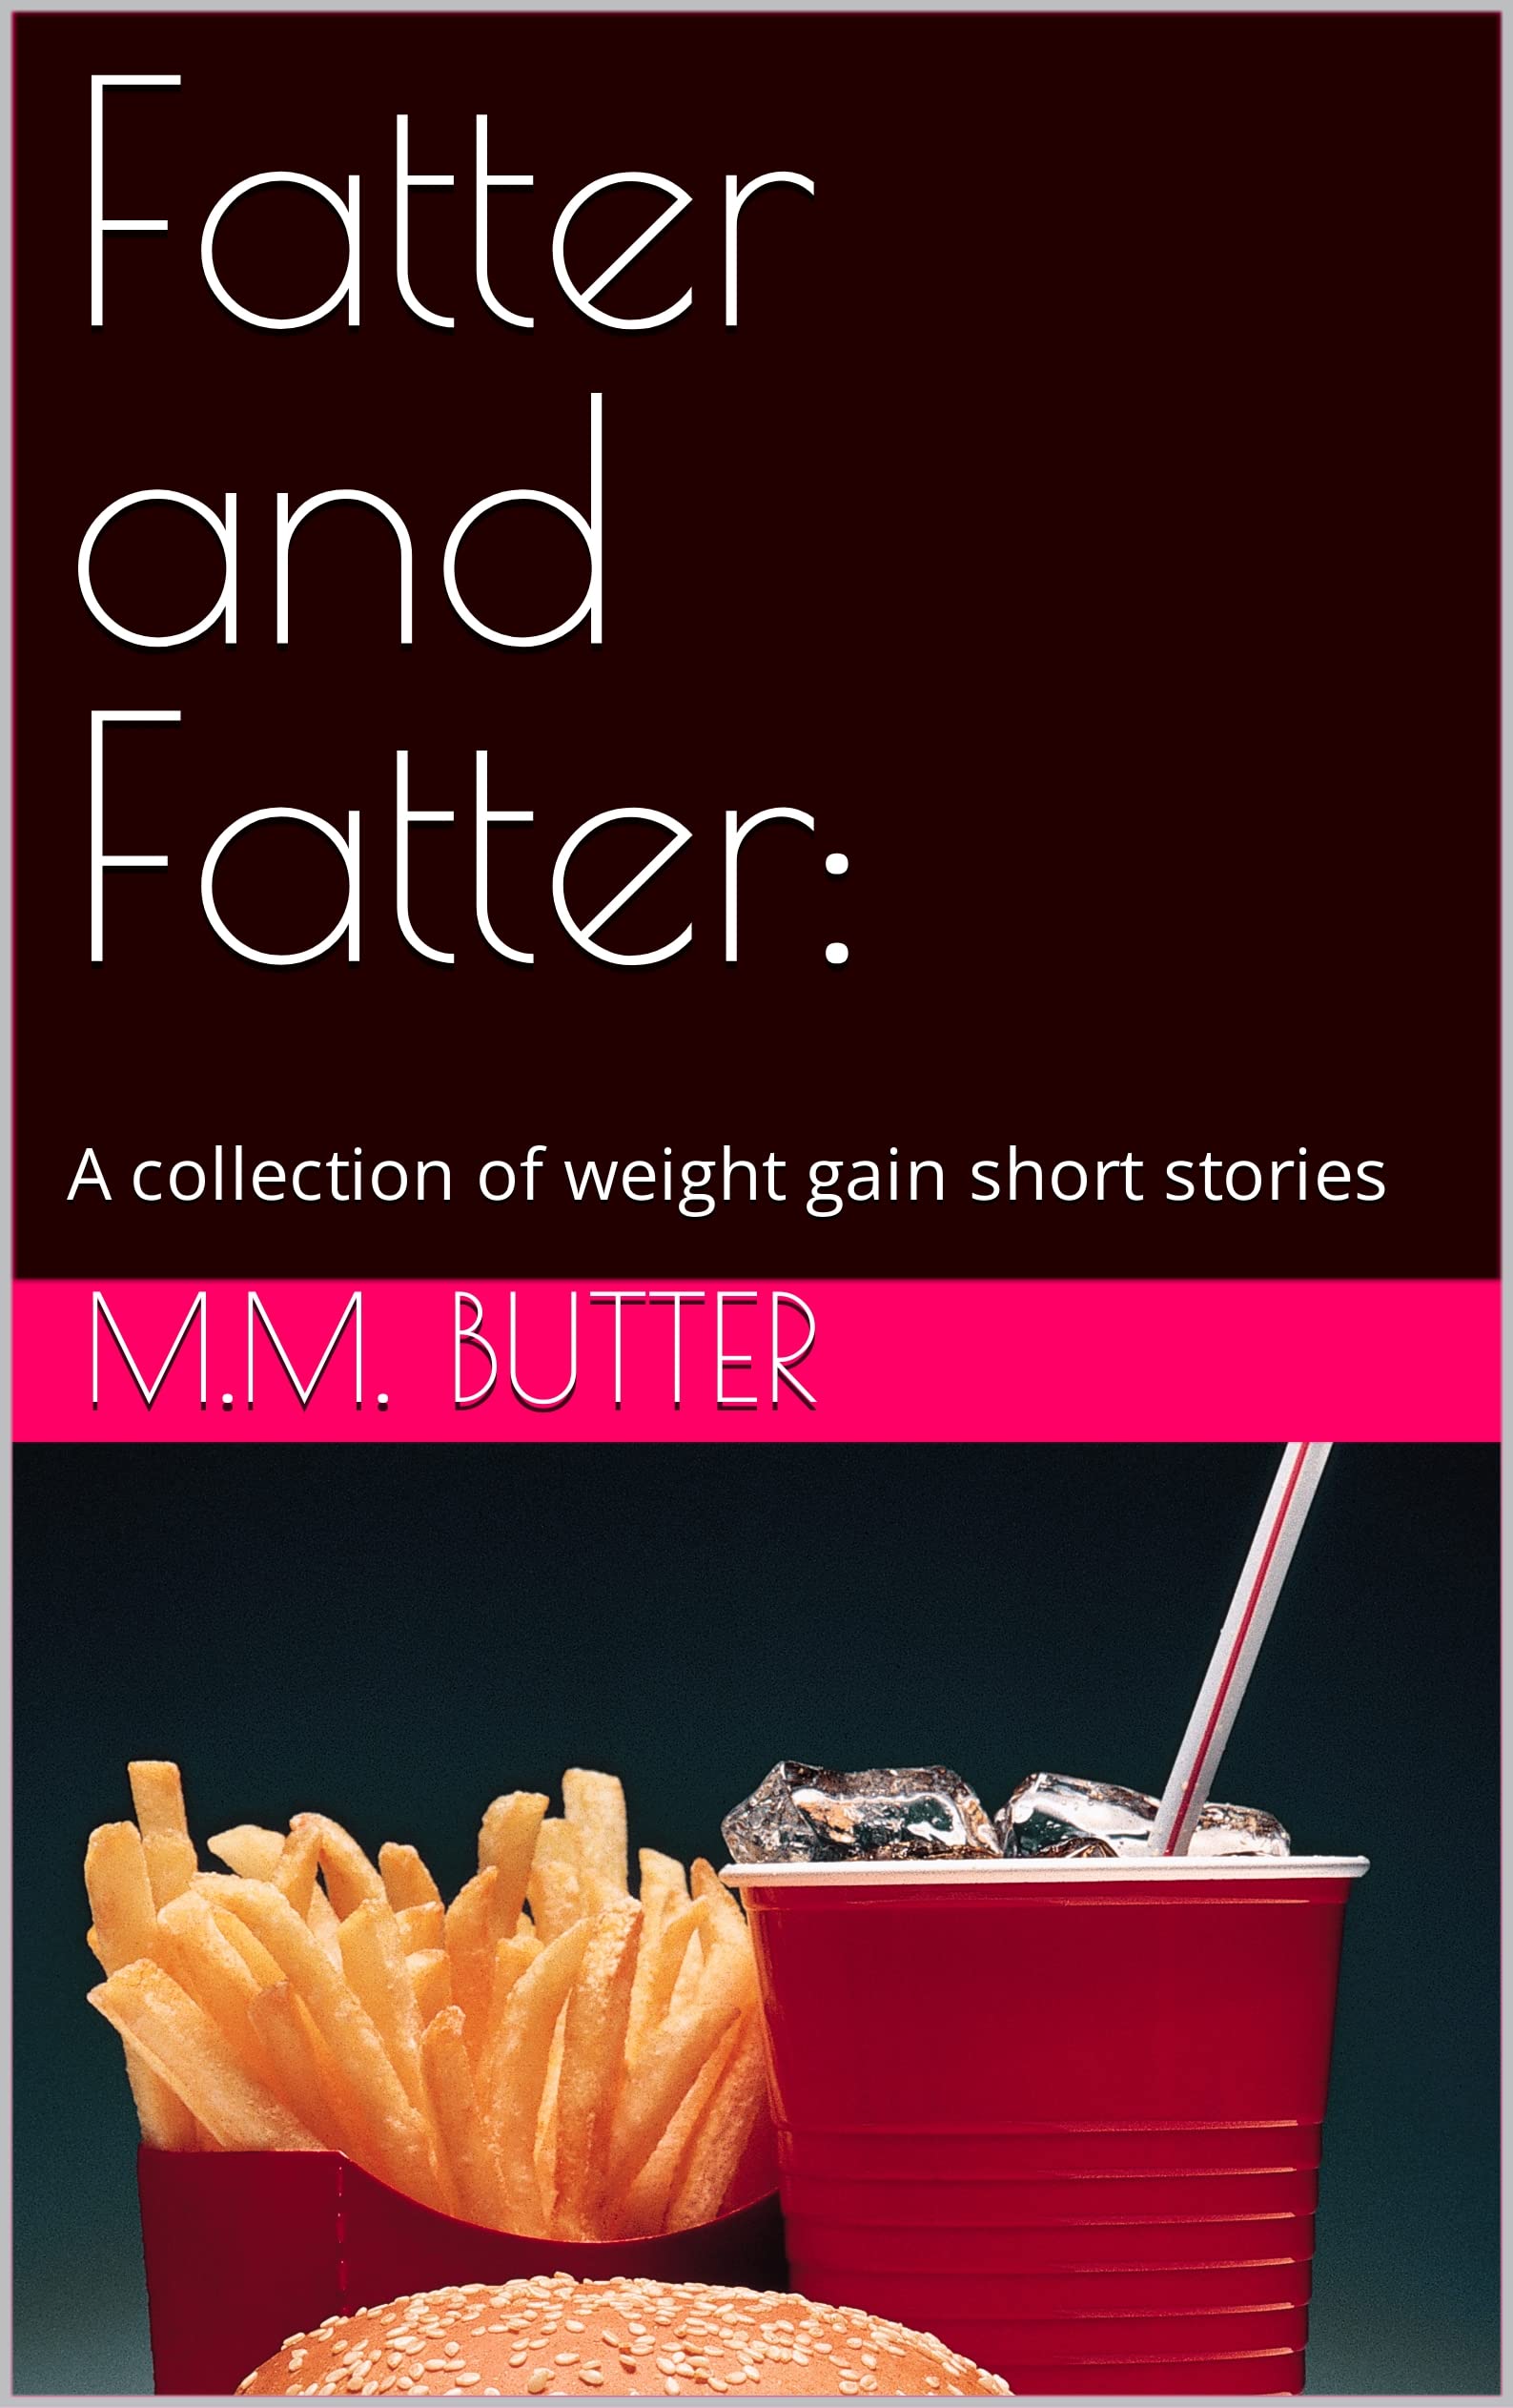 betty mcdonnell recommends fattening weight gain stories pic